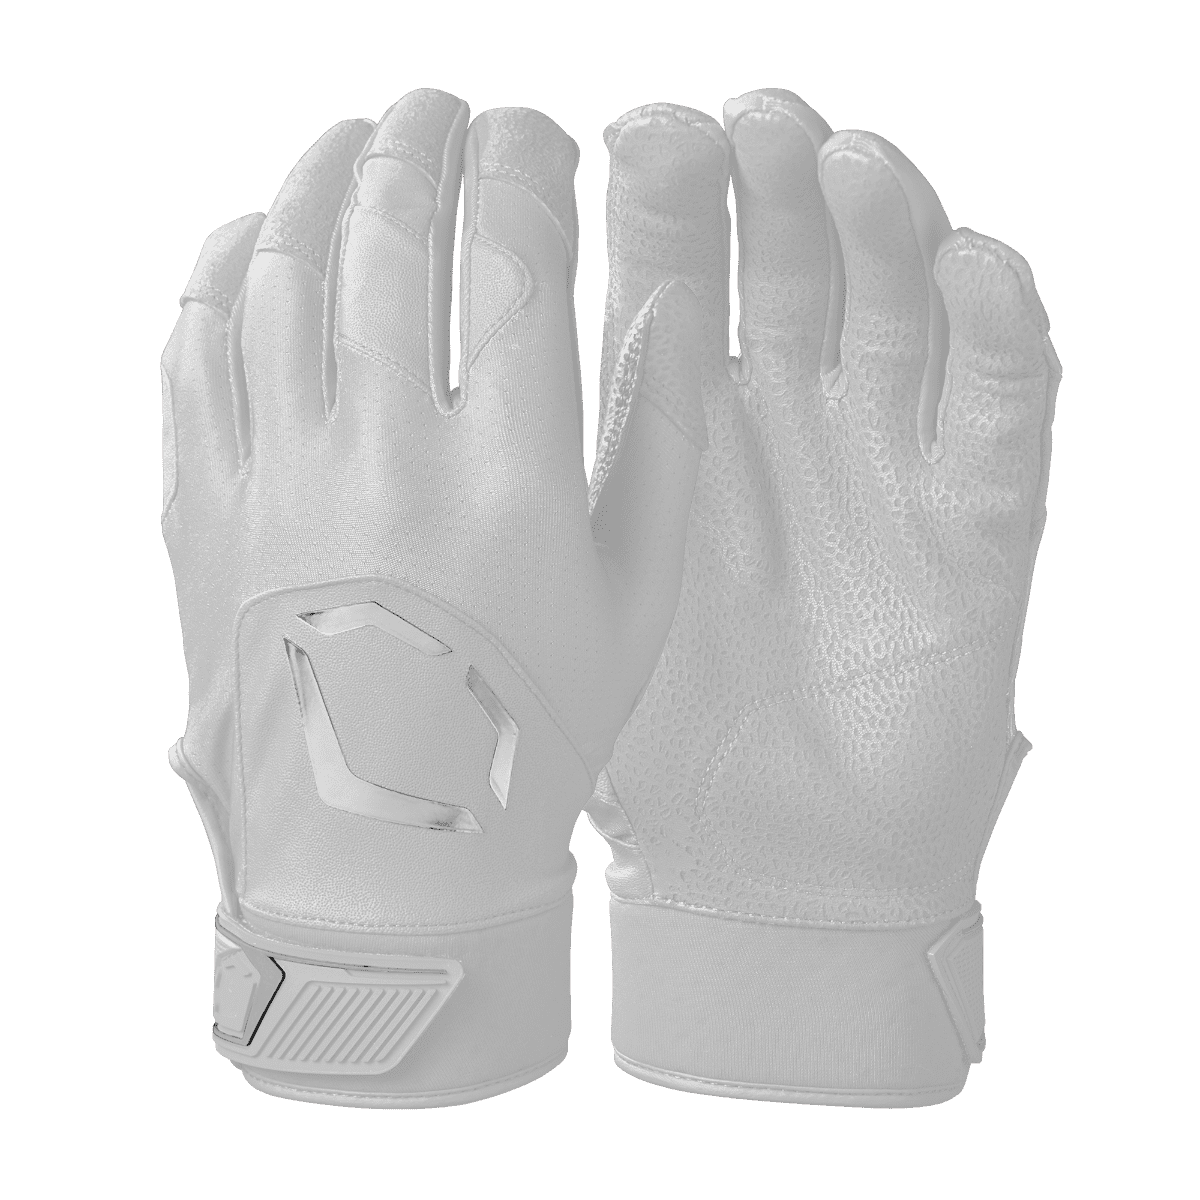 Adult and Youth EvoShield Standout Batting Glove 